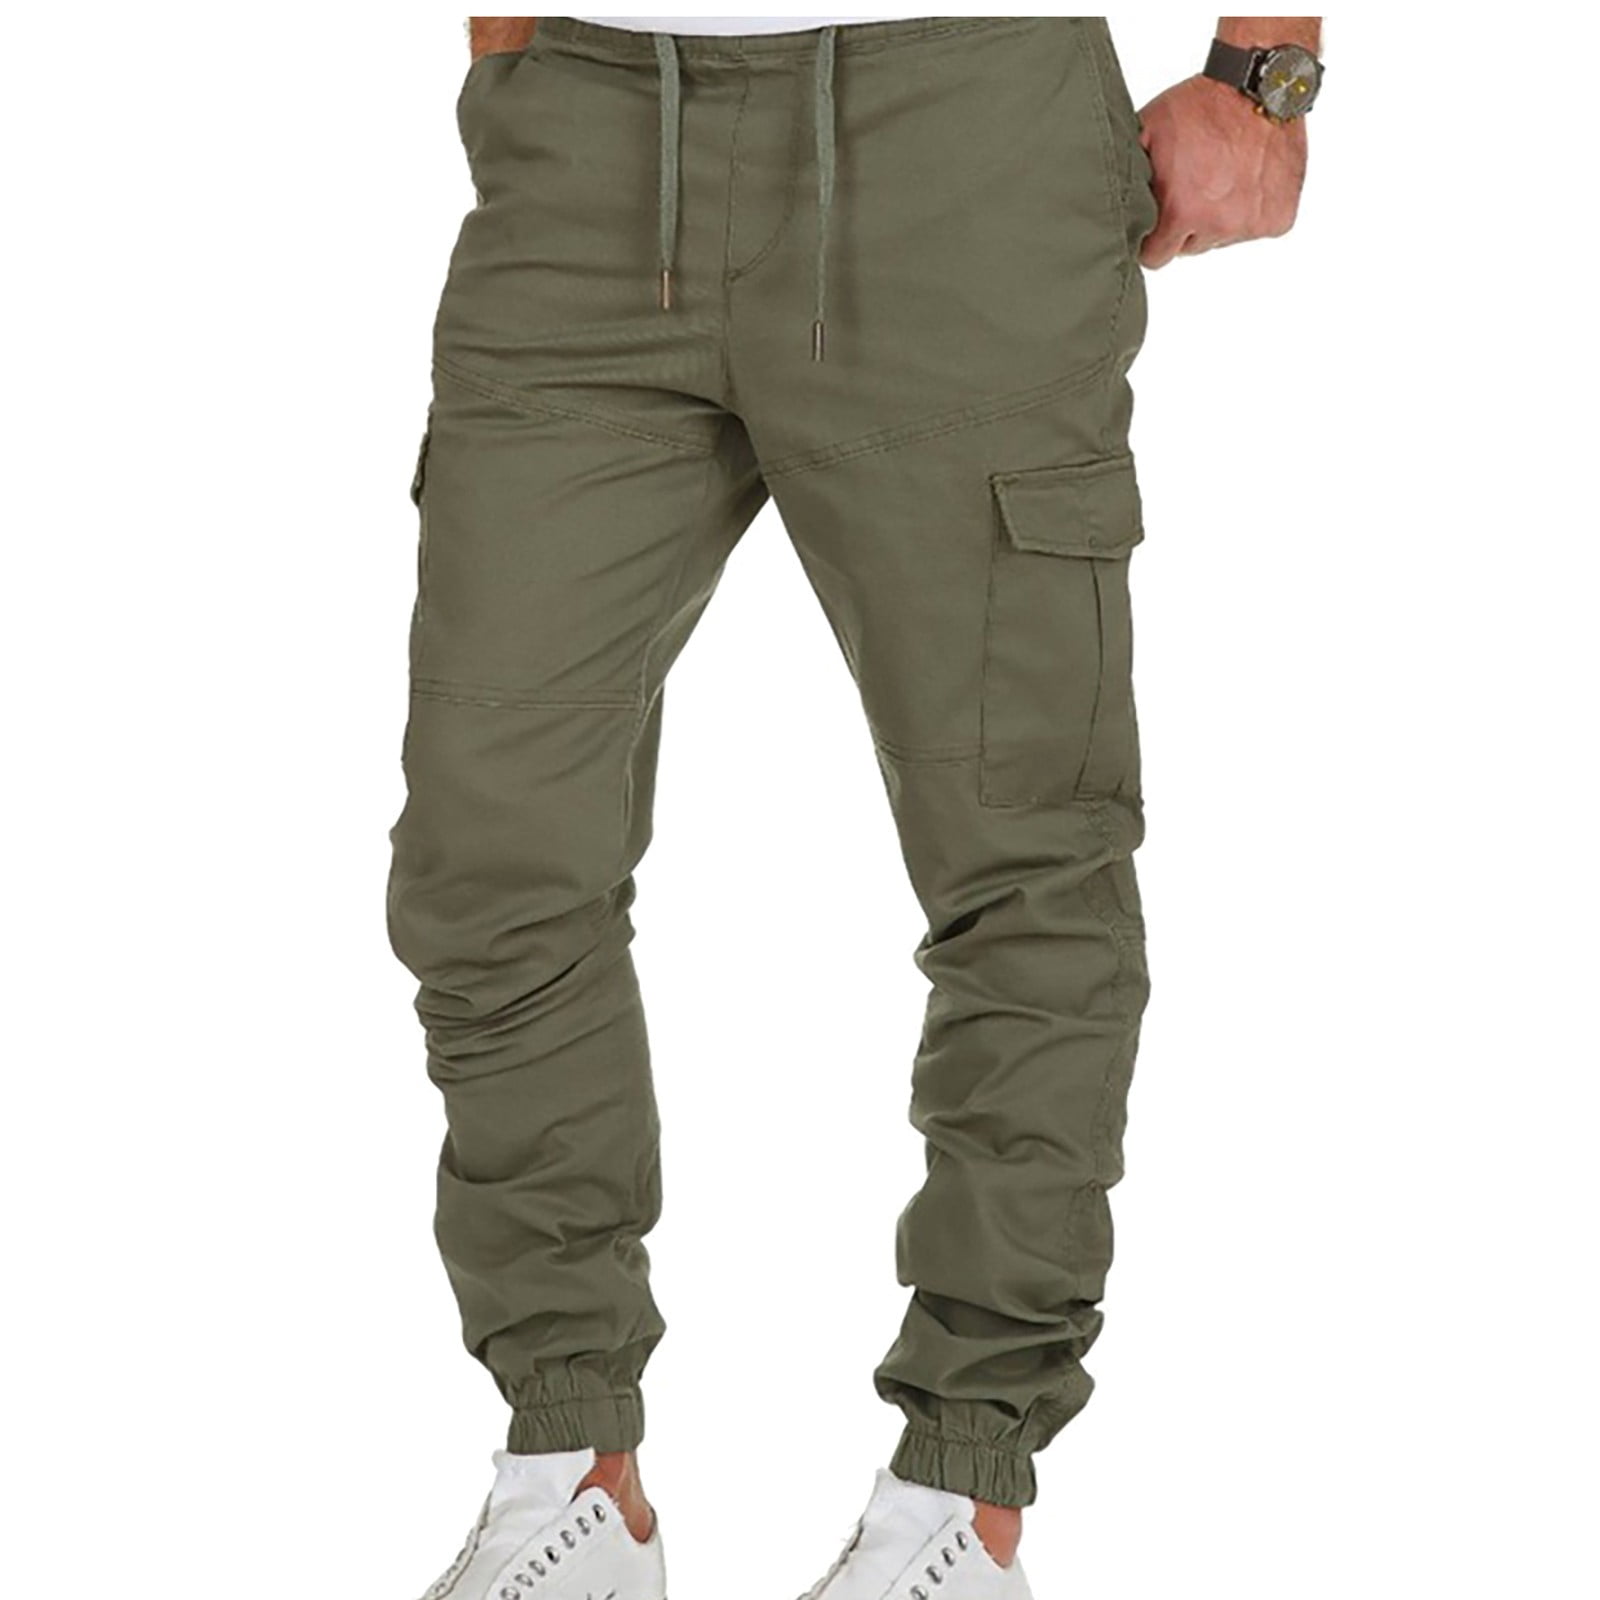 amidoa Men Solid Casual Cargo Pant with Multiple Pockets Drawstring ...